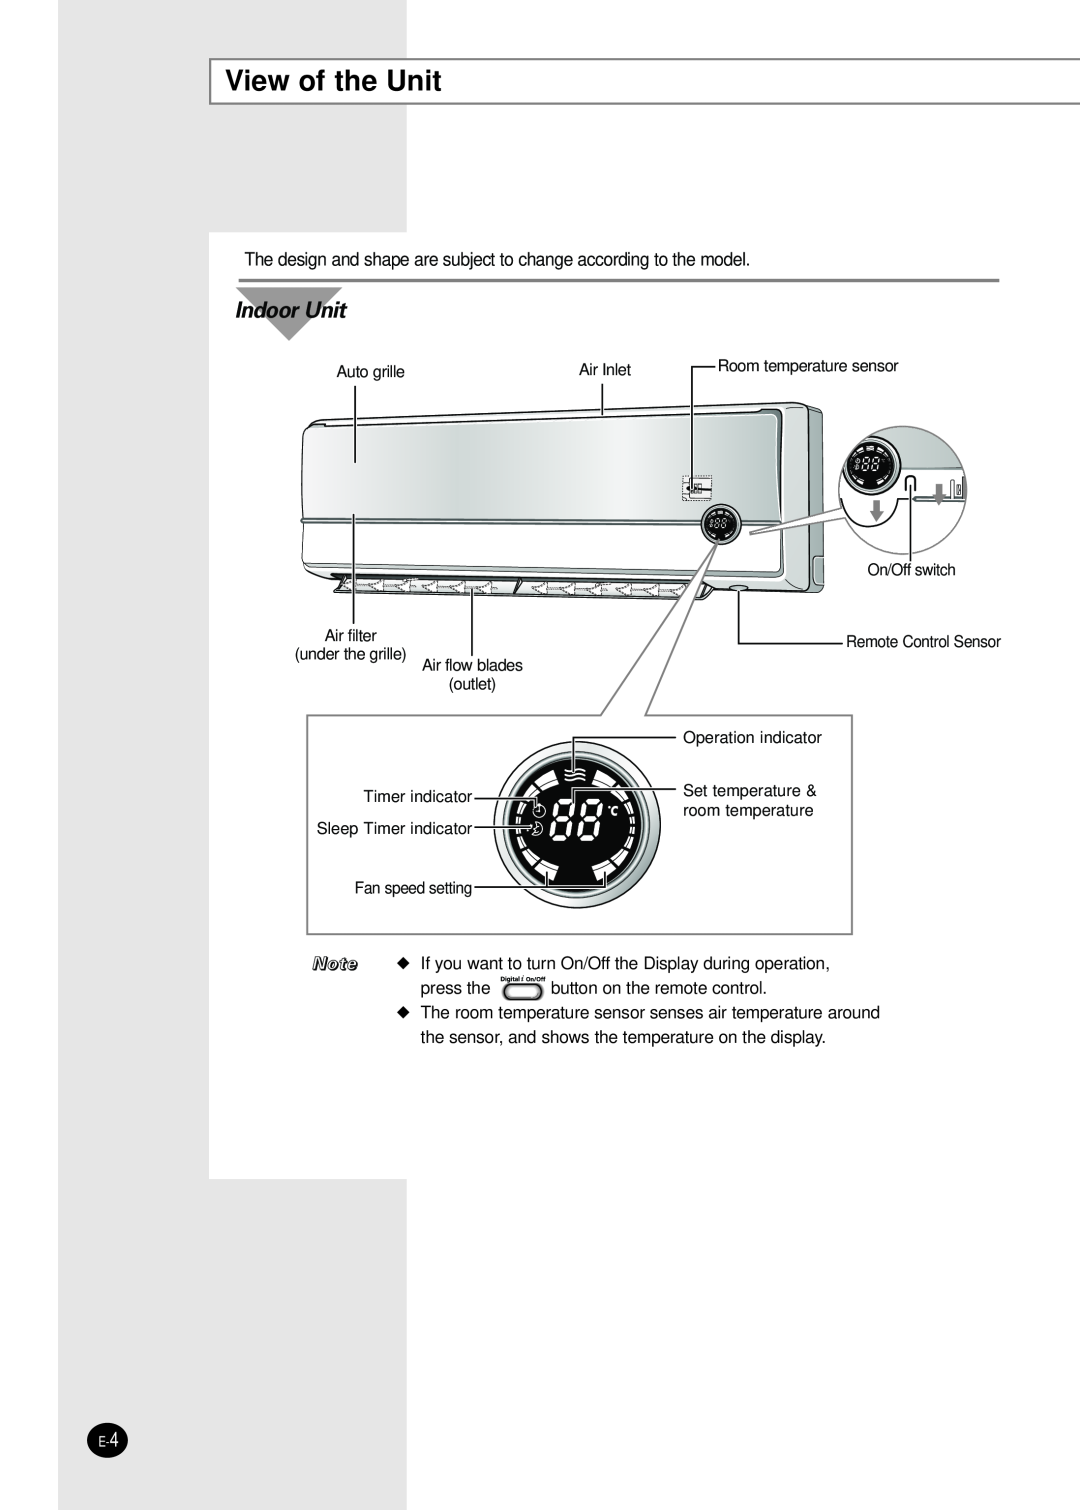 Samsung MH023FPEA, MH052FPEA1, MH026FPEA, MH035FPEA, MH020FPEA user manual View of the Unit, Indoor Unit 